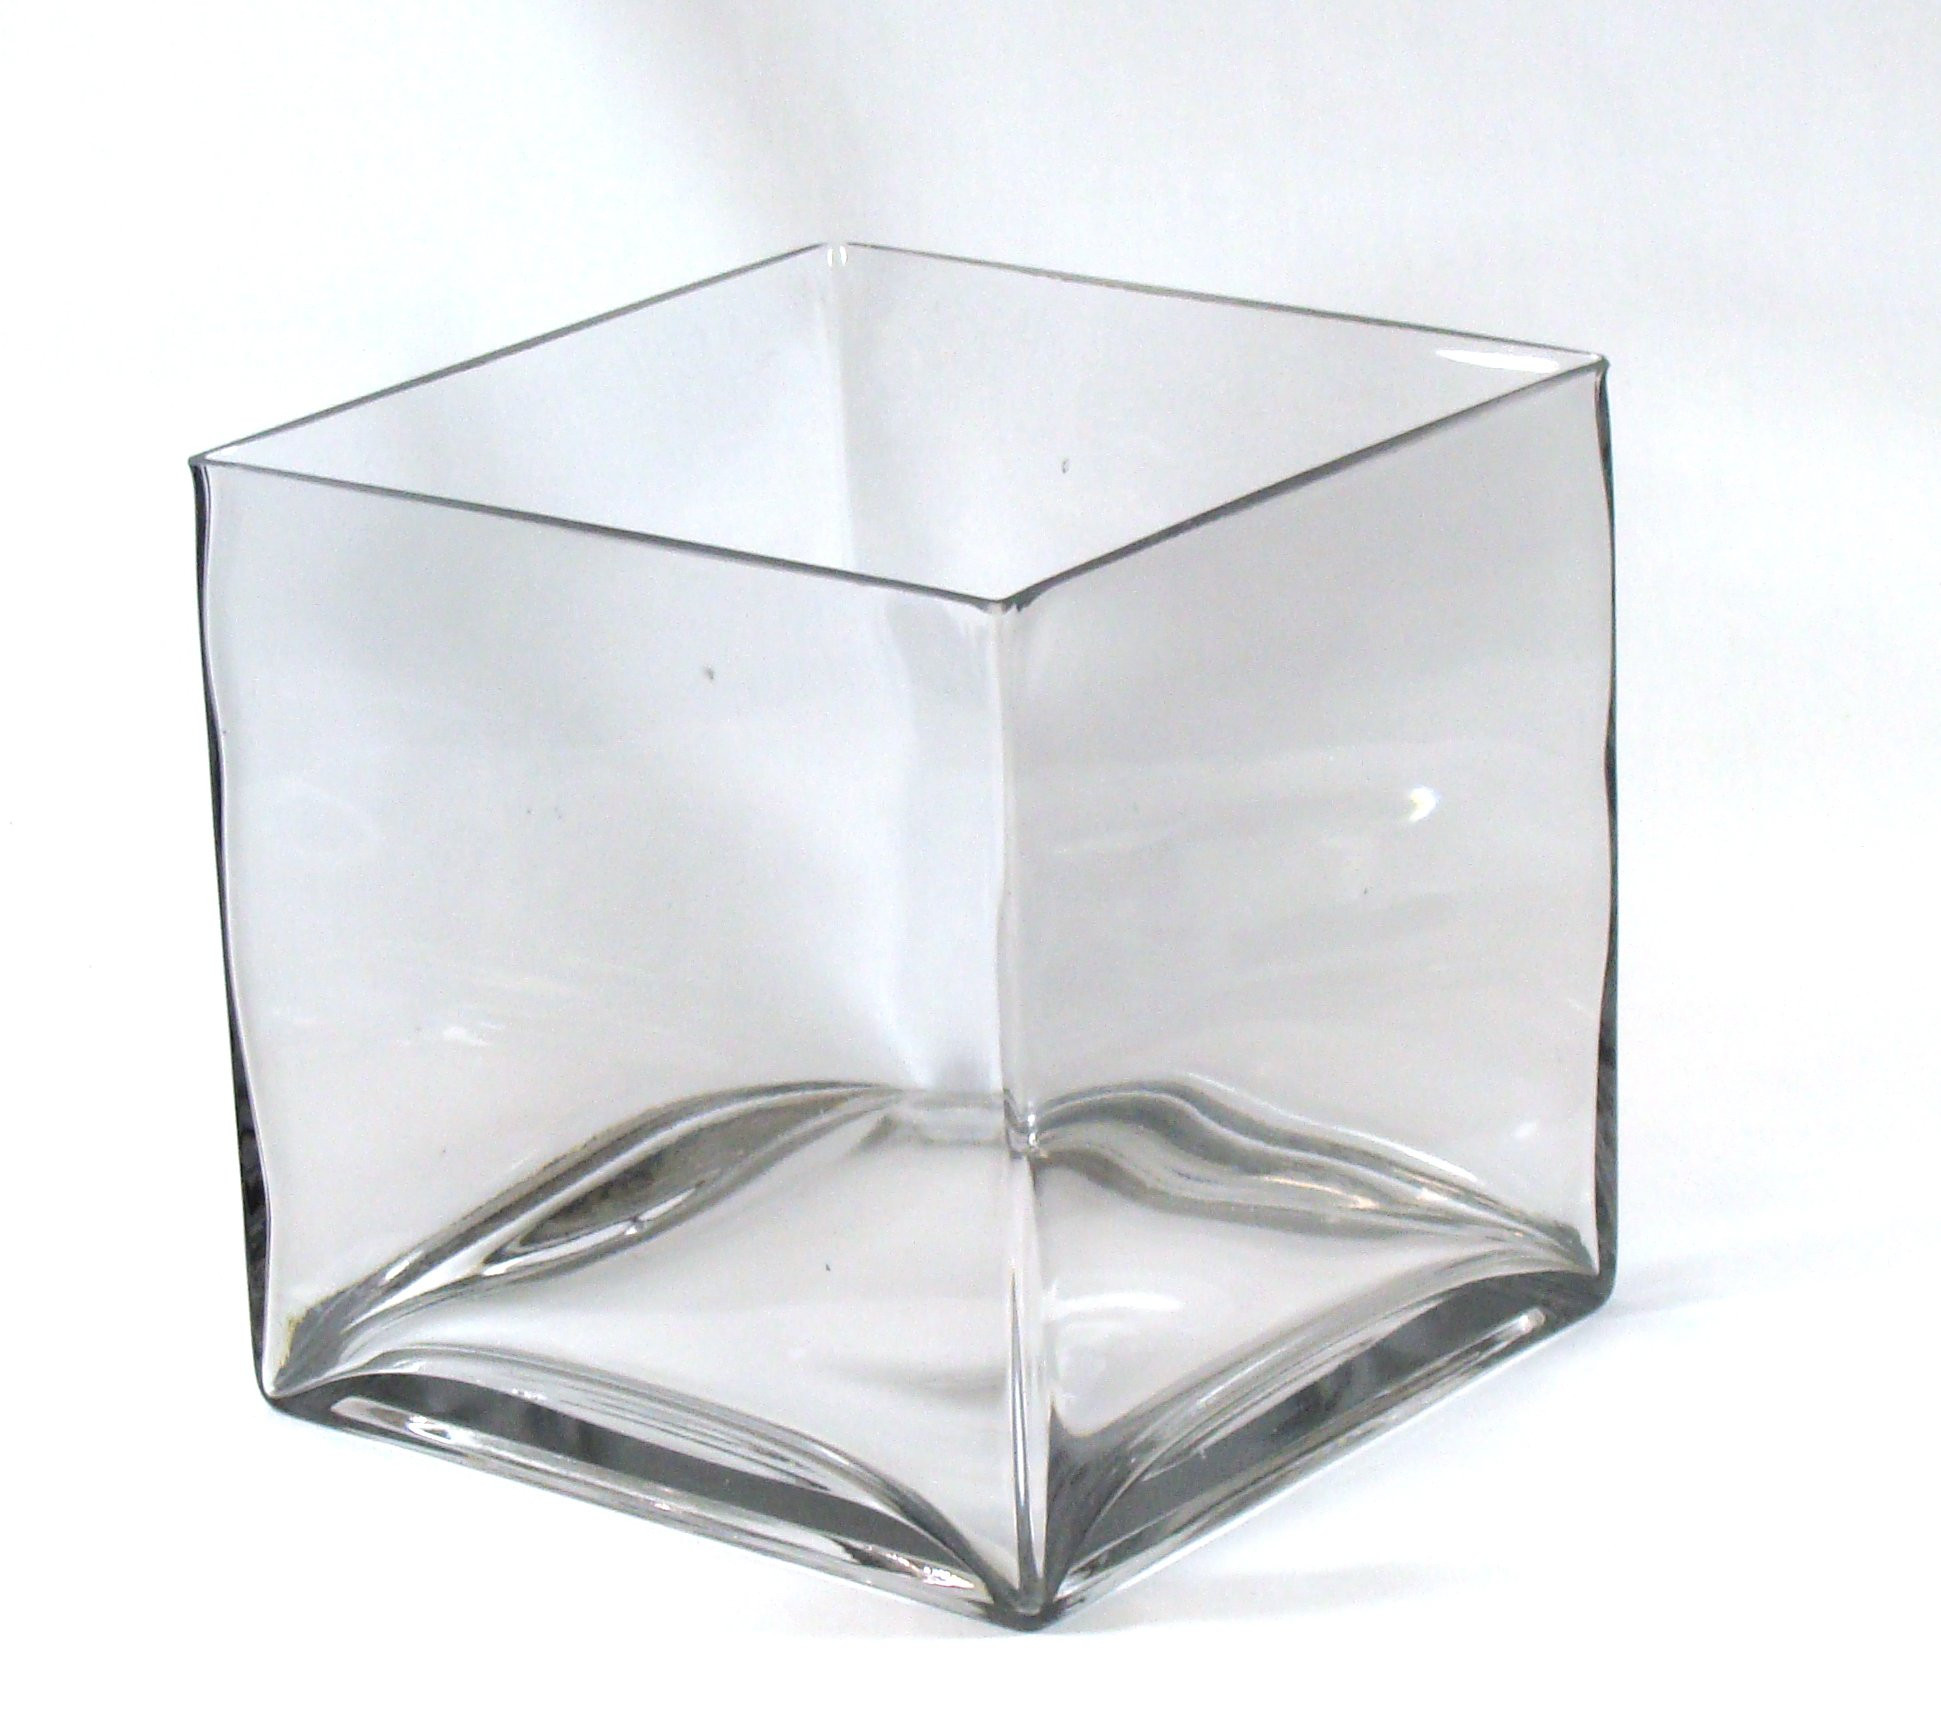 19 Great 18 Inch Crystal Vase 2024 free download 18 inch crystal vase of buy 8 inch round large glass vase 8 clear cylinder oversize with regard to 8 square large glass vase 8 inch clear cube oversize centerpiece 8x8x8 candleholder